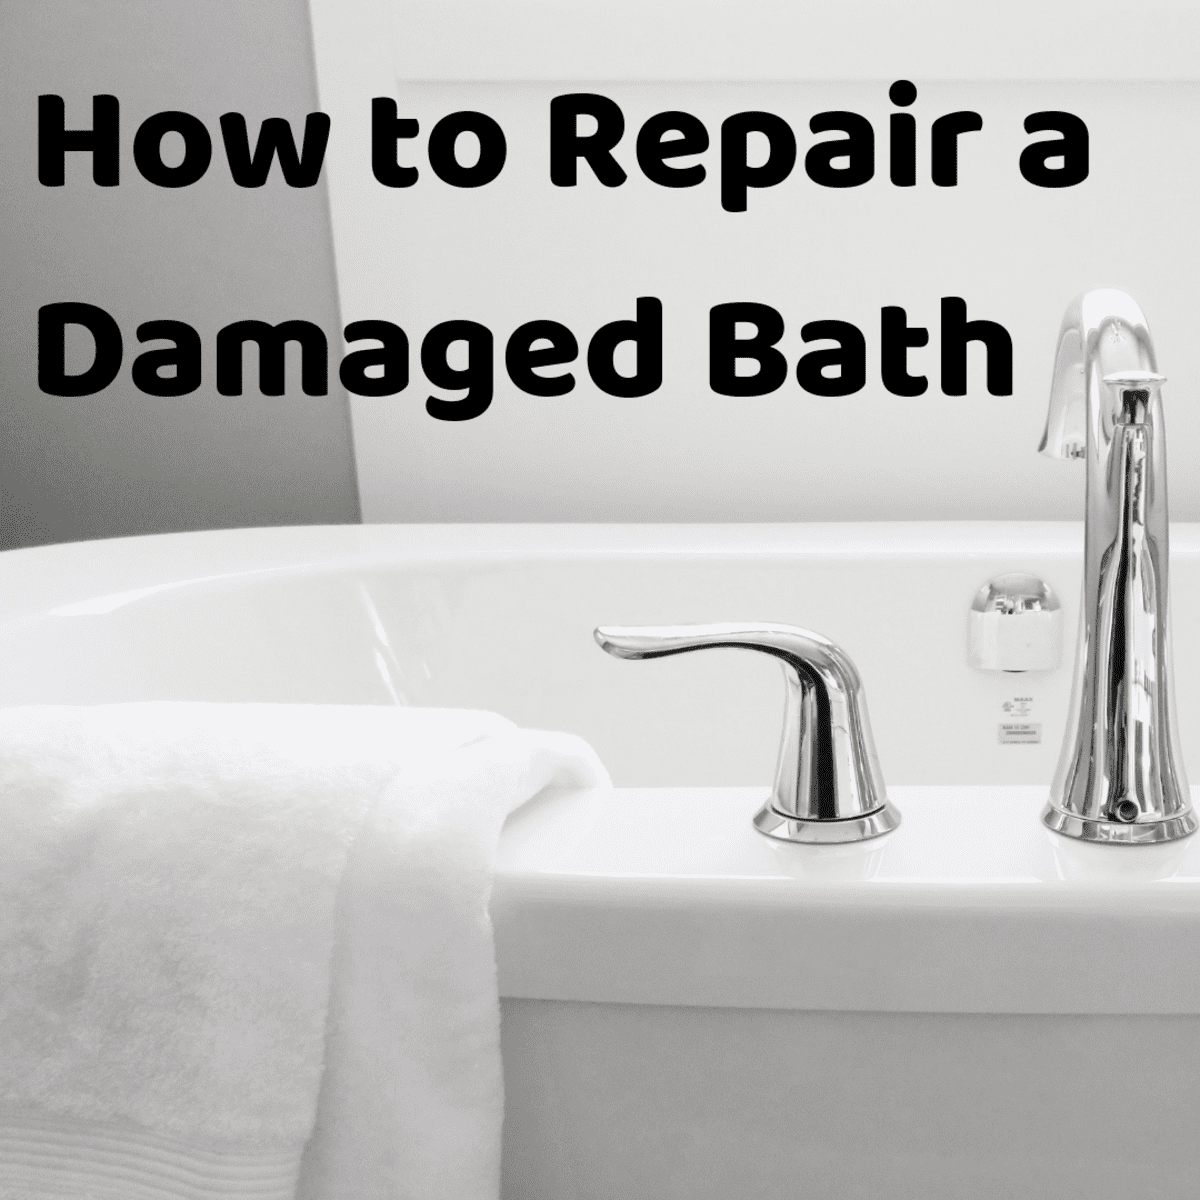 How To Repair A Scratched Steel Bath, How To Cut Out A Steel Bathtub